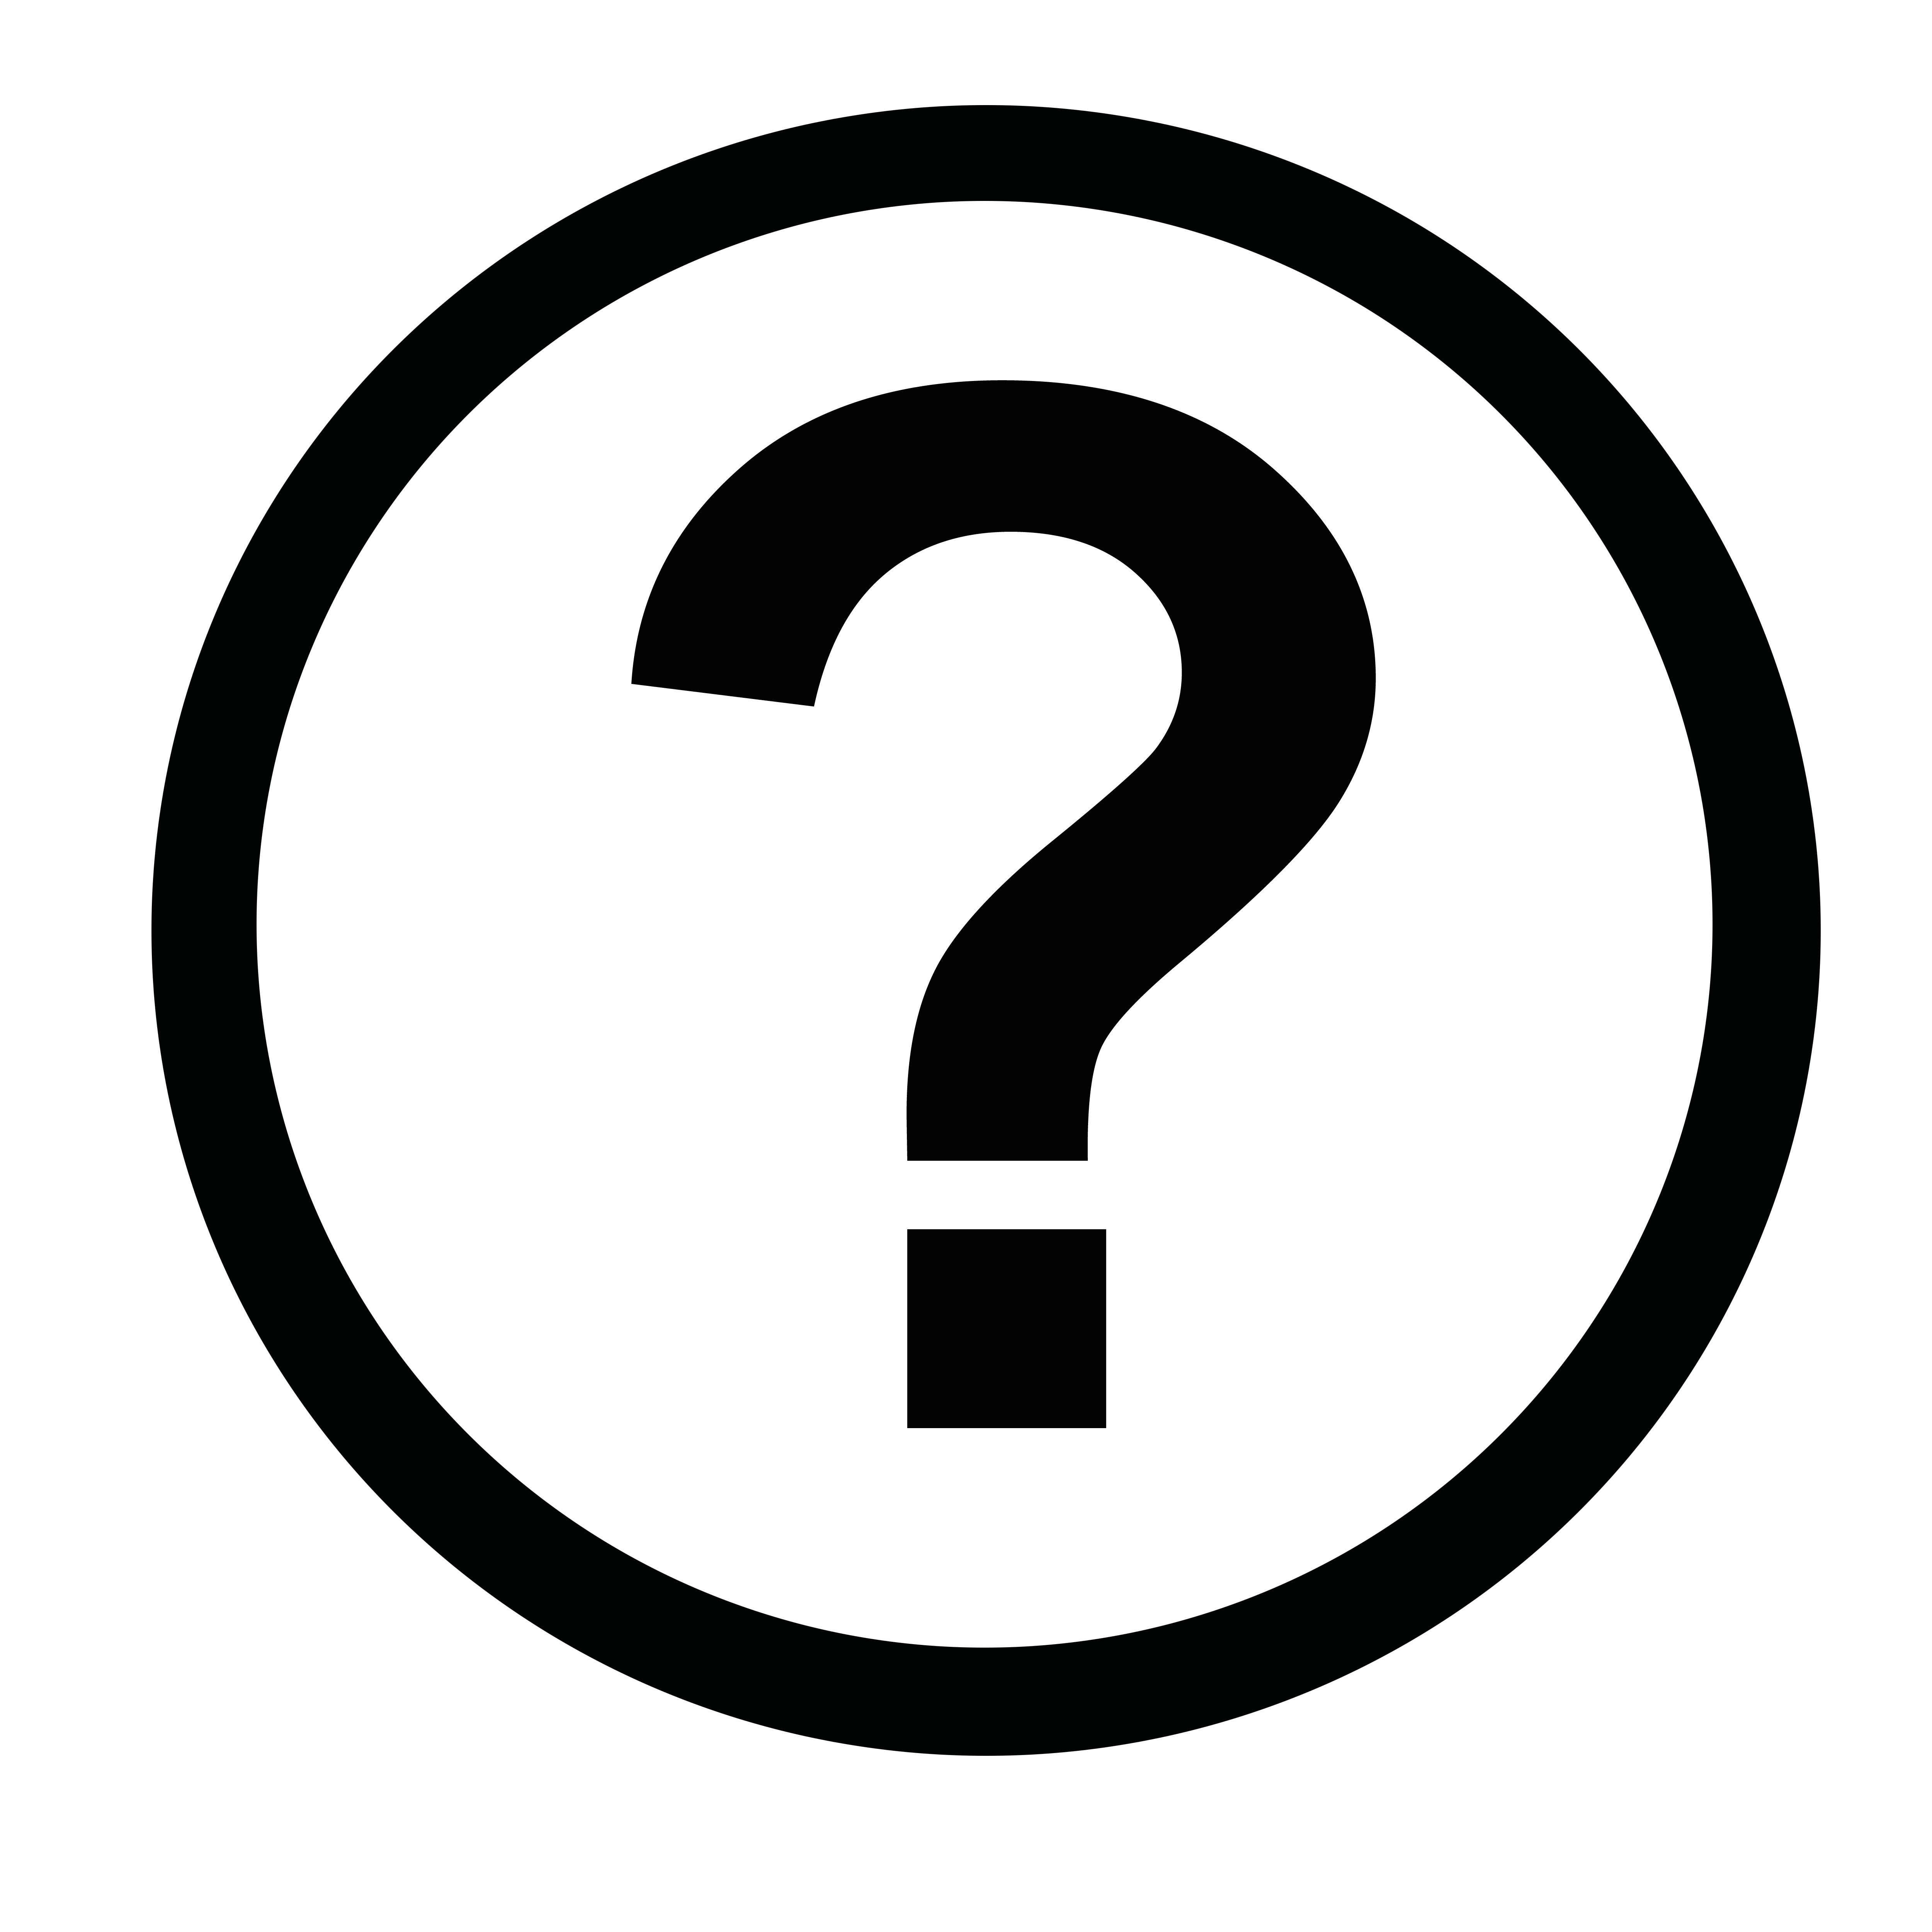 Free Images Of Question Marks - Clipart library